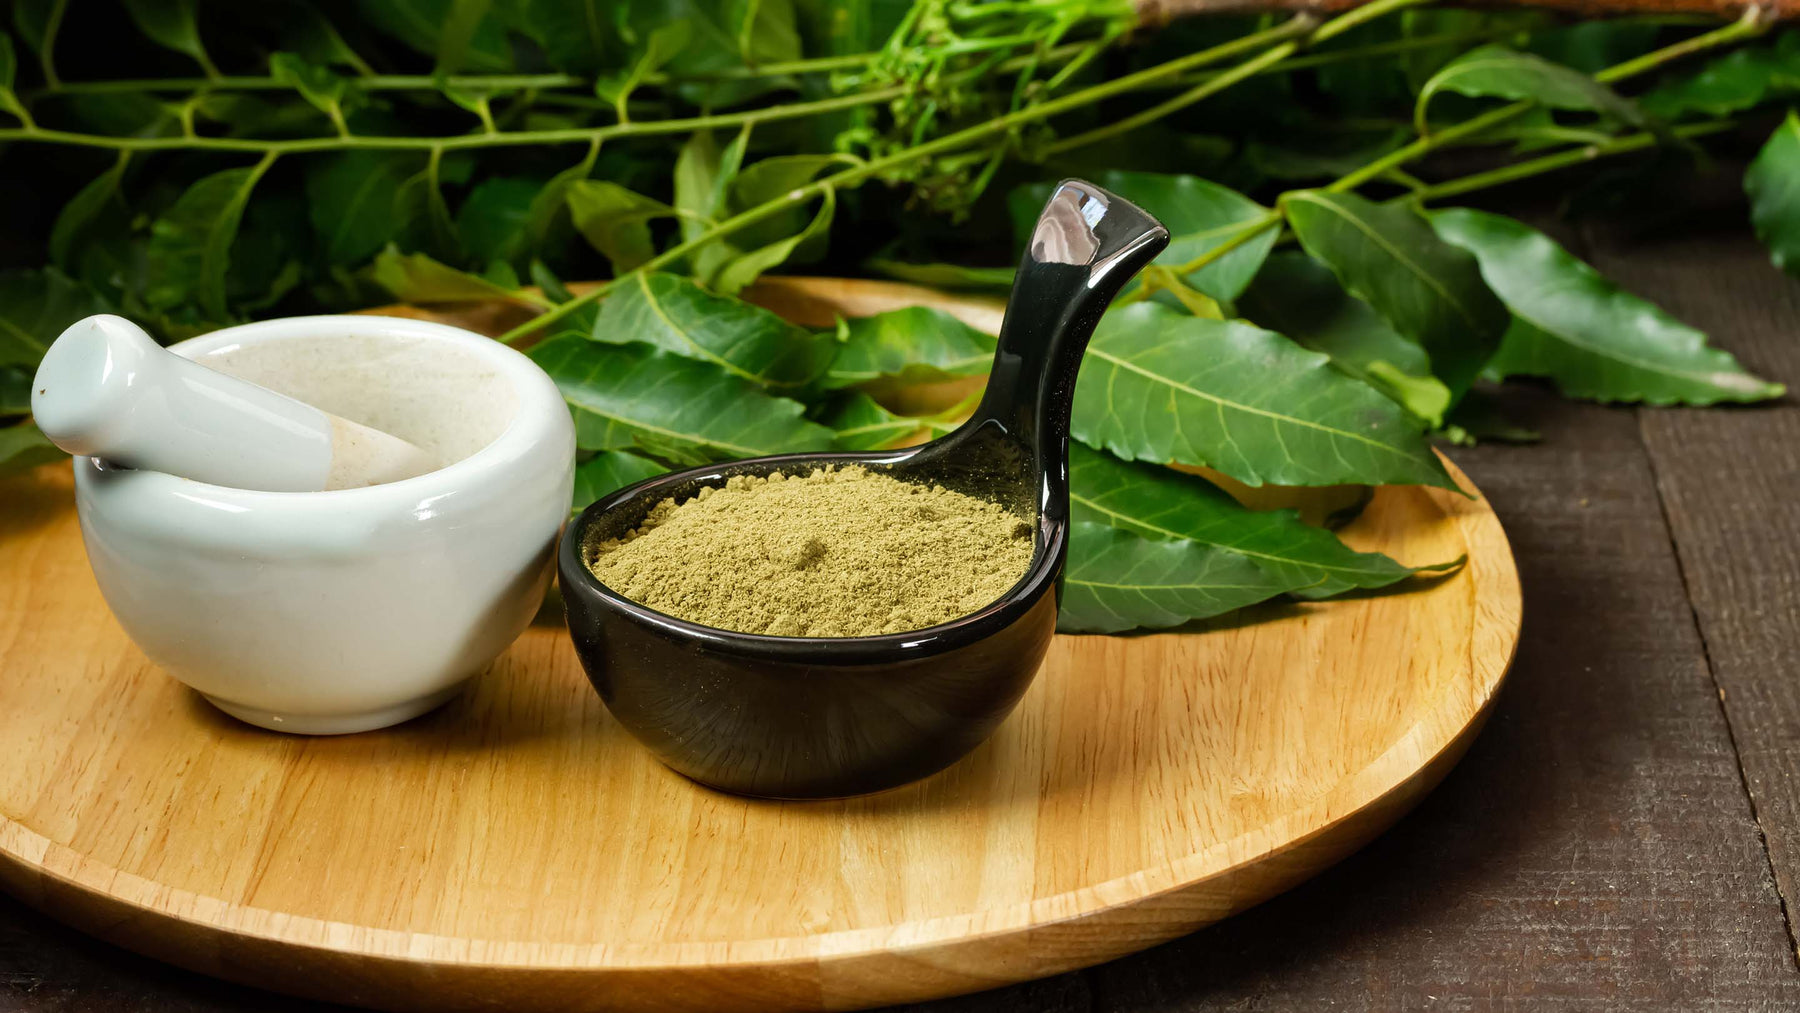 Neem powder in black bowl with neem leaf and white mortar and pestle on wooden background